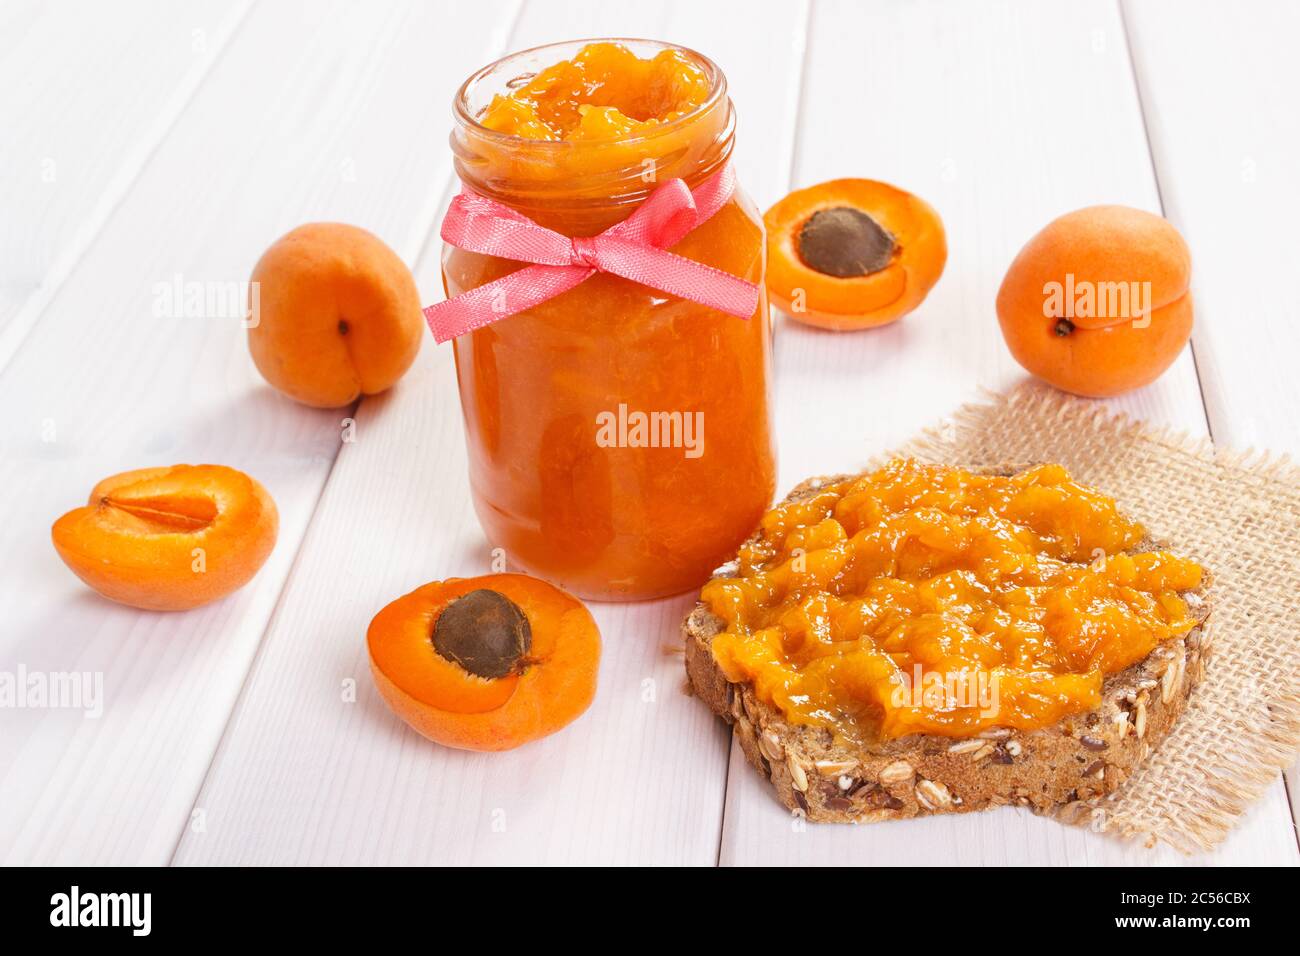 Fresh prepared snack with homemade apricot marmalade, concept of healthy sweet eating Stock Photo